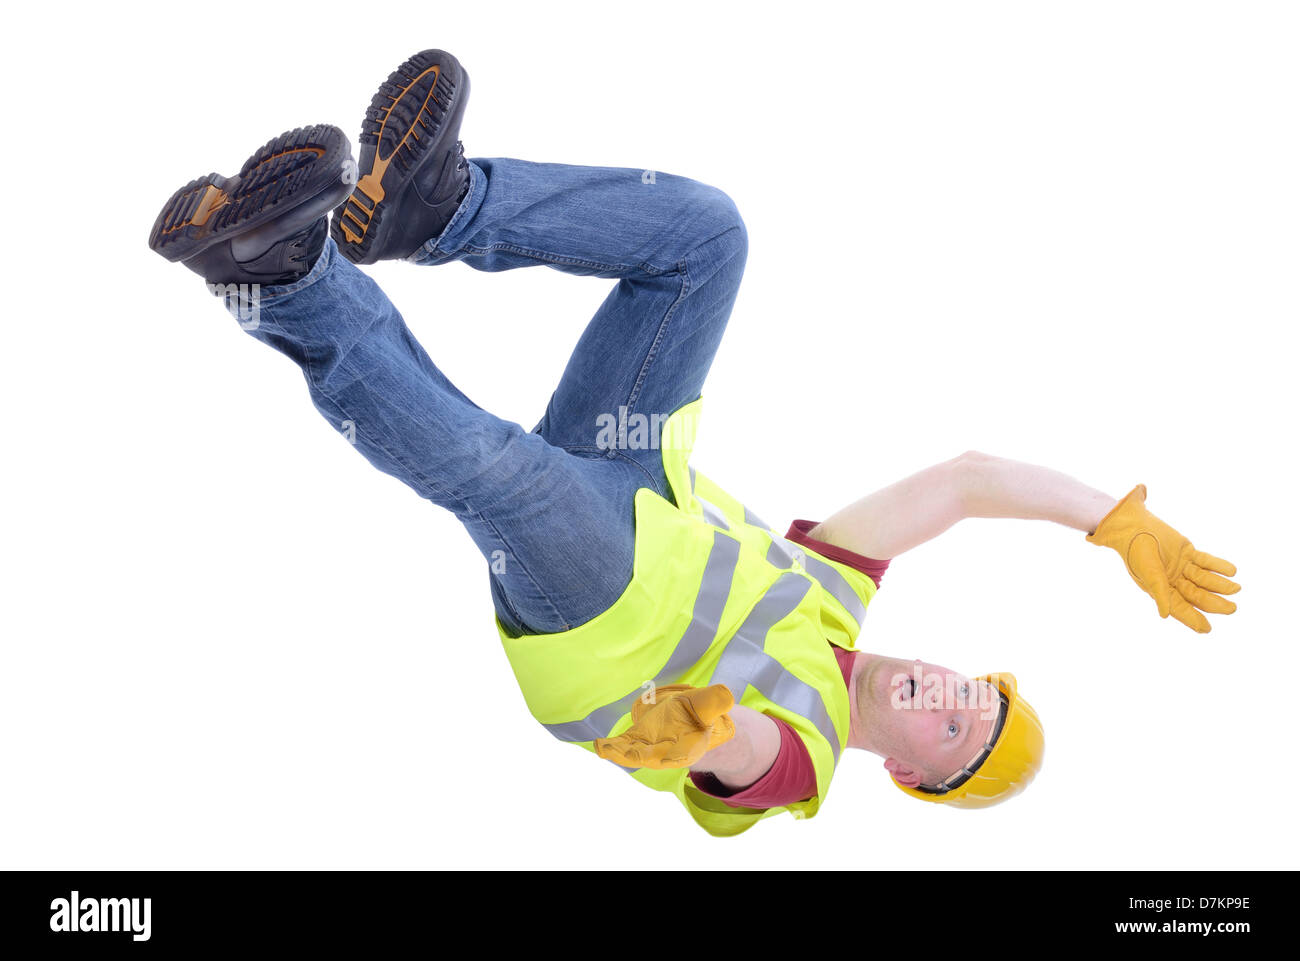 Construction worker falling isolated on white background Stock Photo